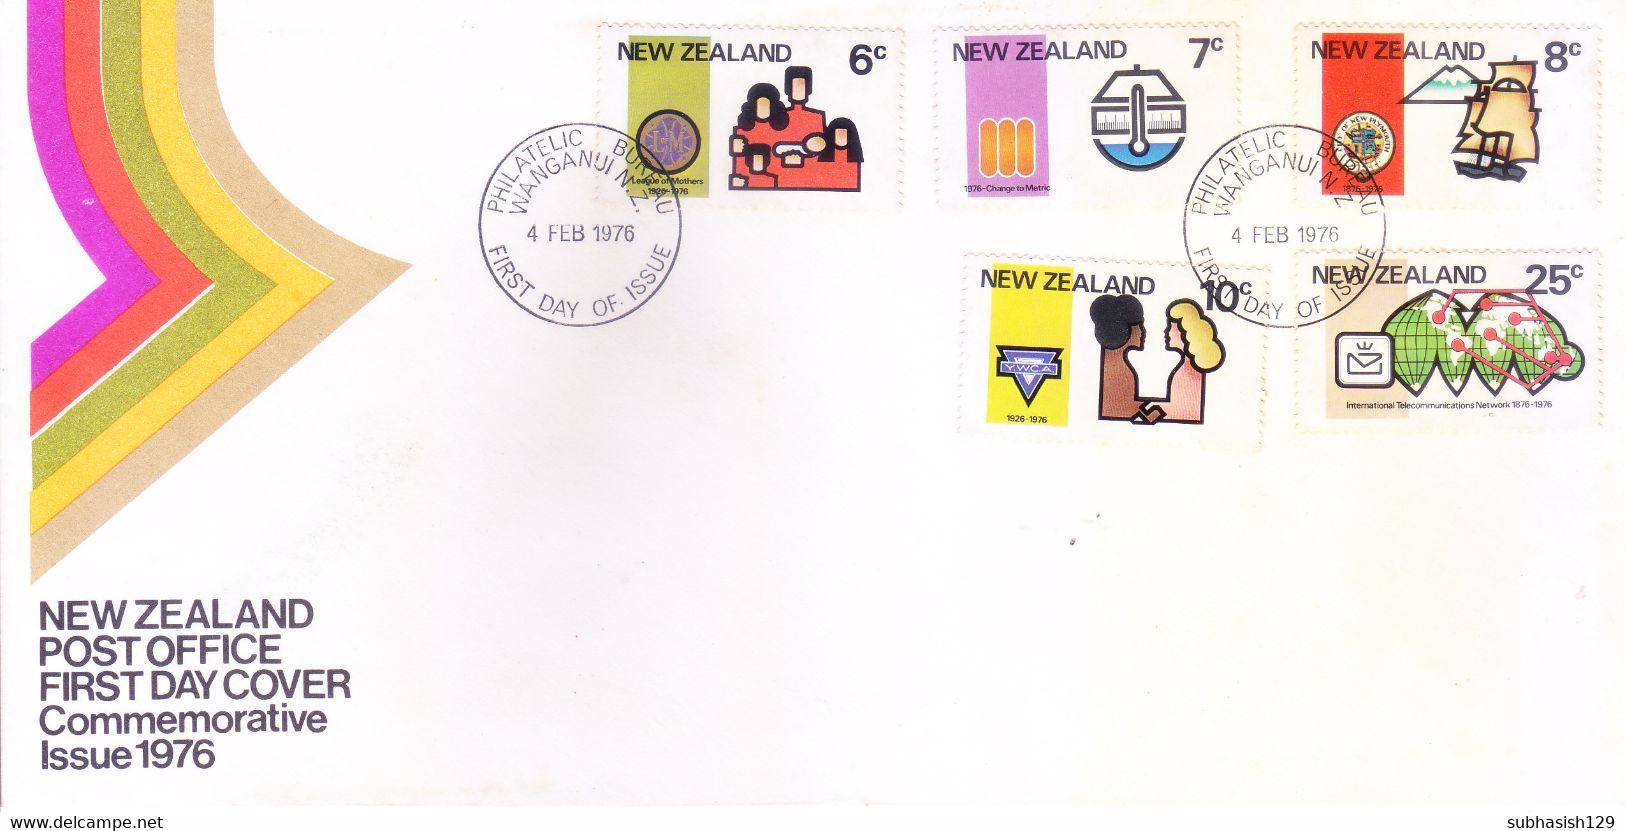 NEW ZEALAND : FIRST DAY COVER : 04 FEBRUARY 1976 : SET OF 5 : ANNIVERSARIES AND EVENTS - Briefe U. Dokumente